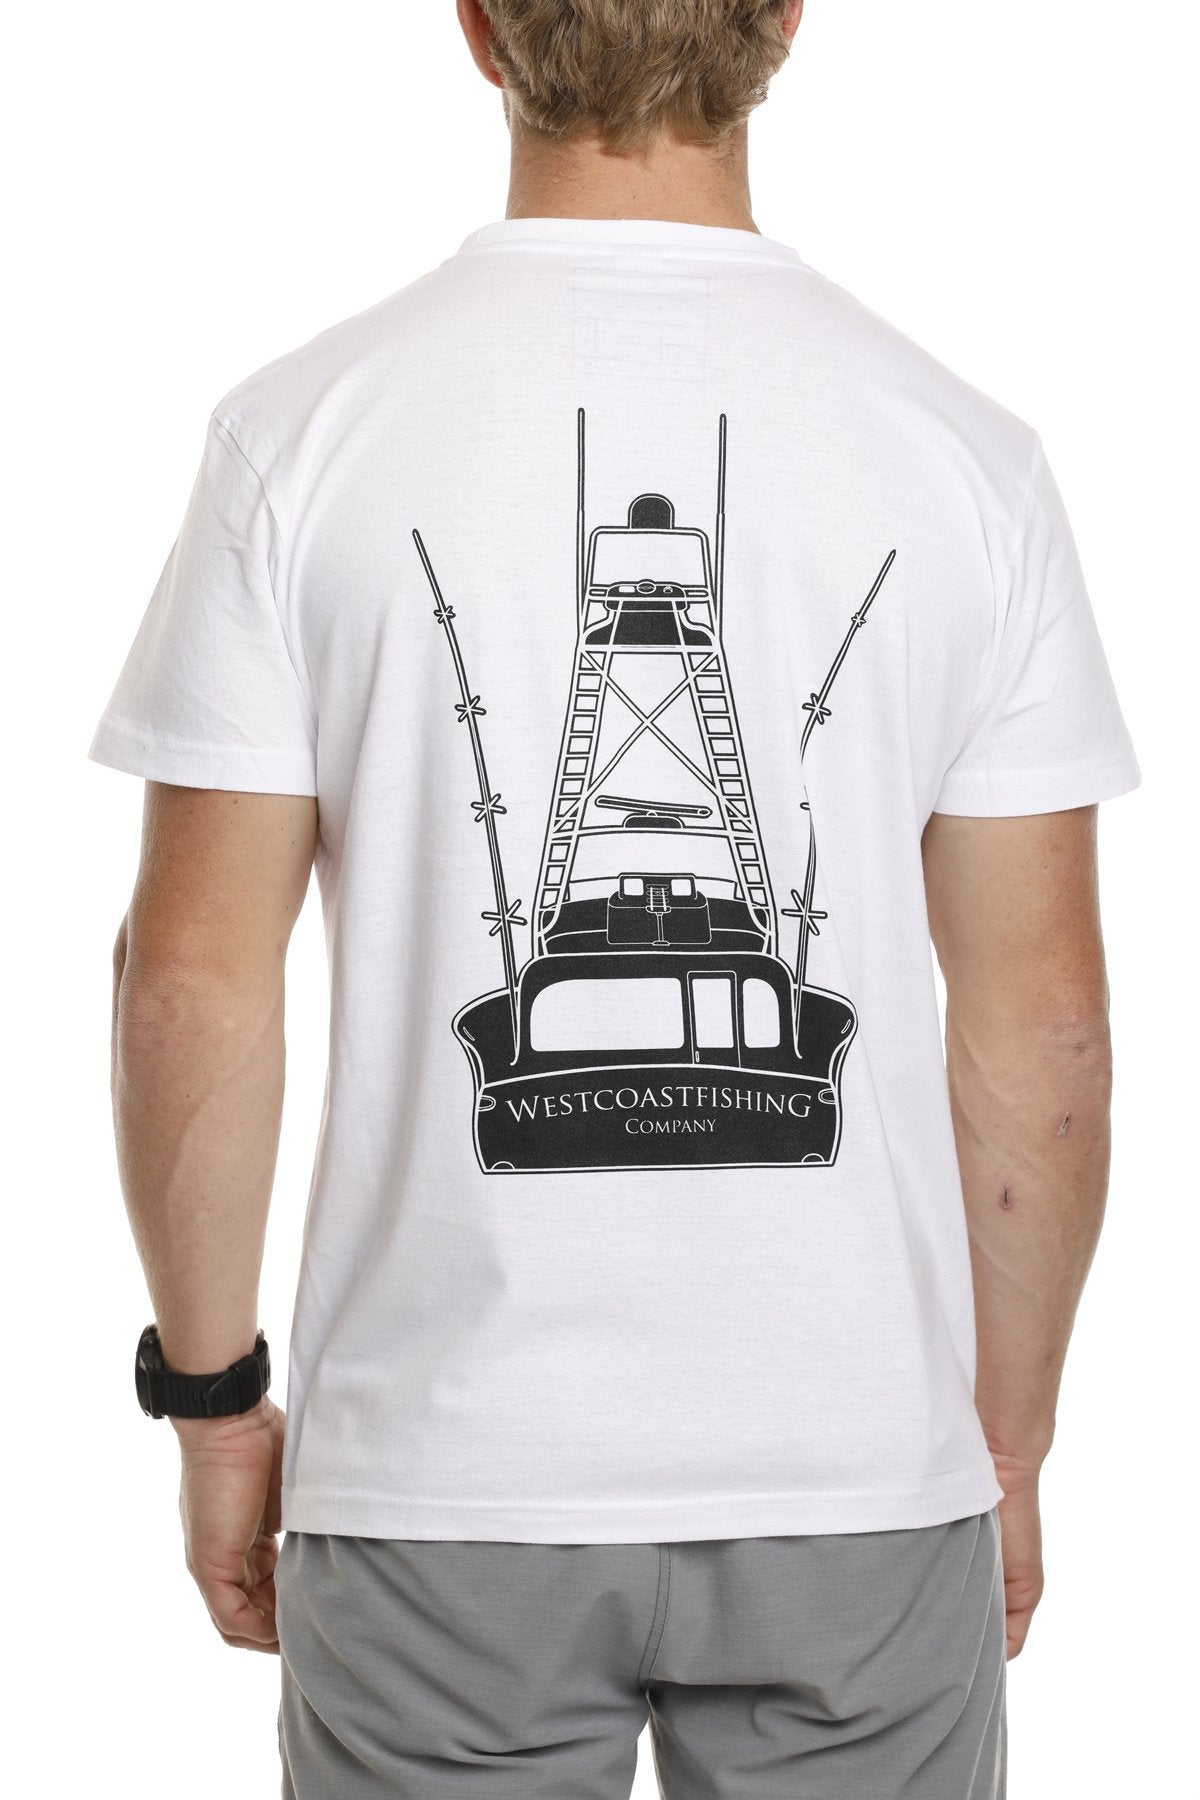 West Coast Fishing Co Sports Fisher Tee White - Compleat Angler